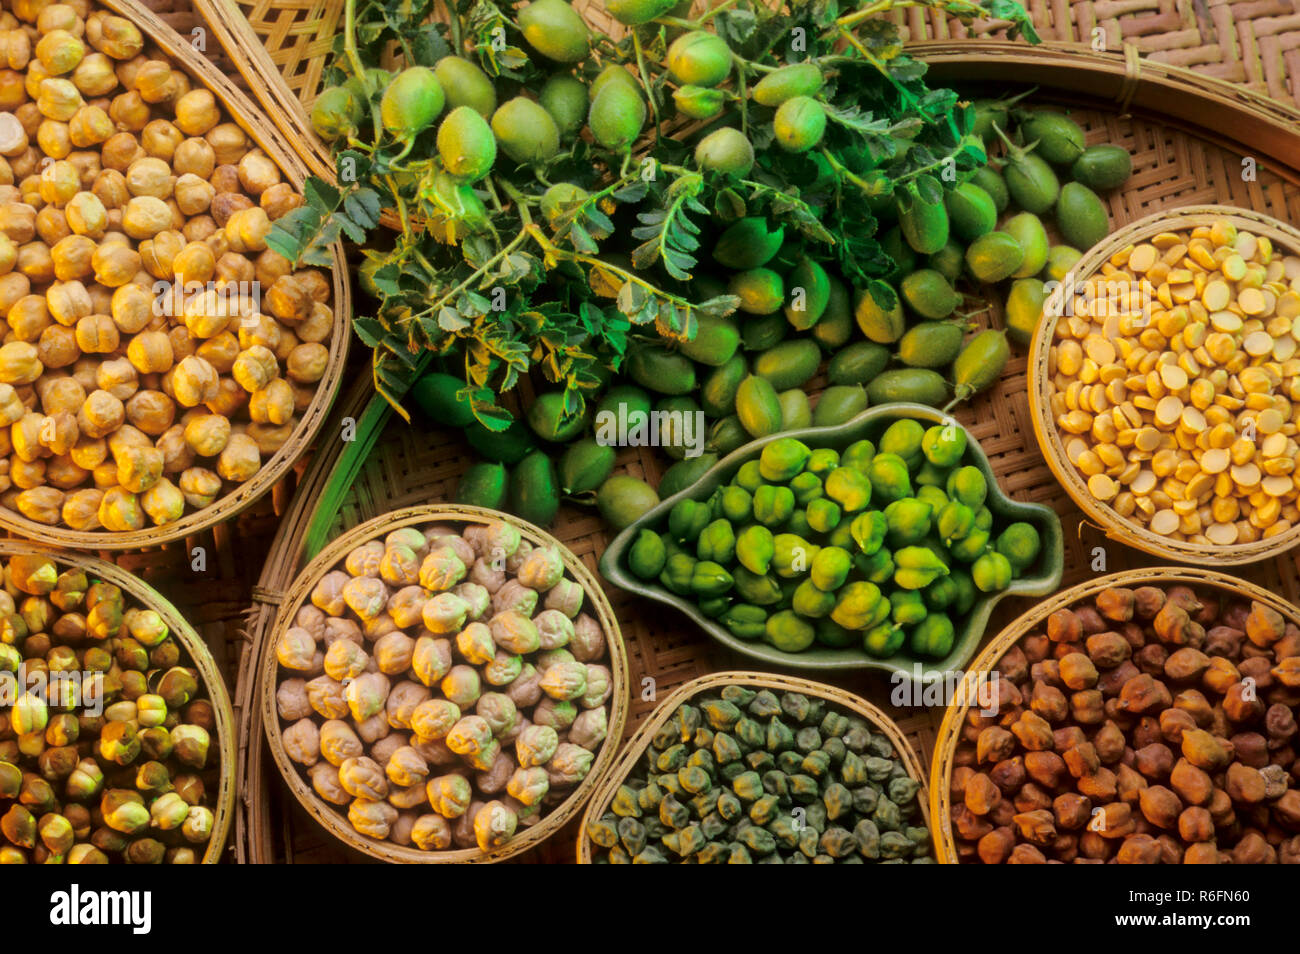 variety of chana gram and it's products, india Stock Photo